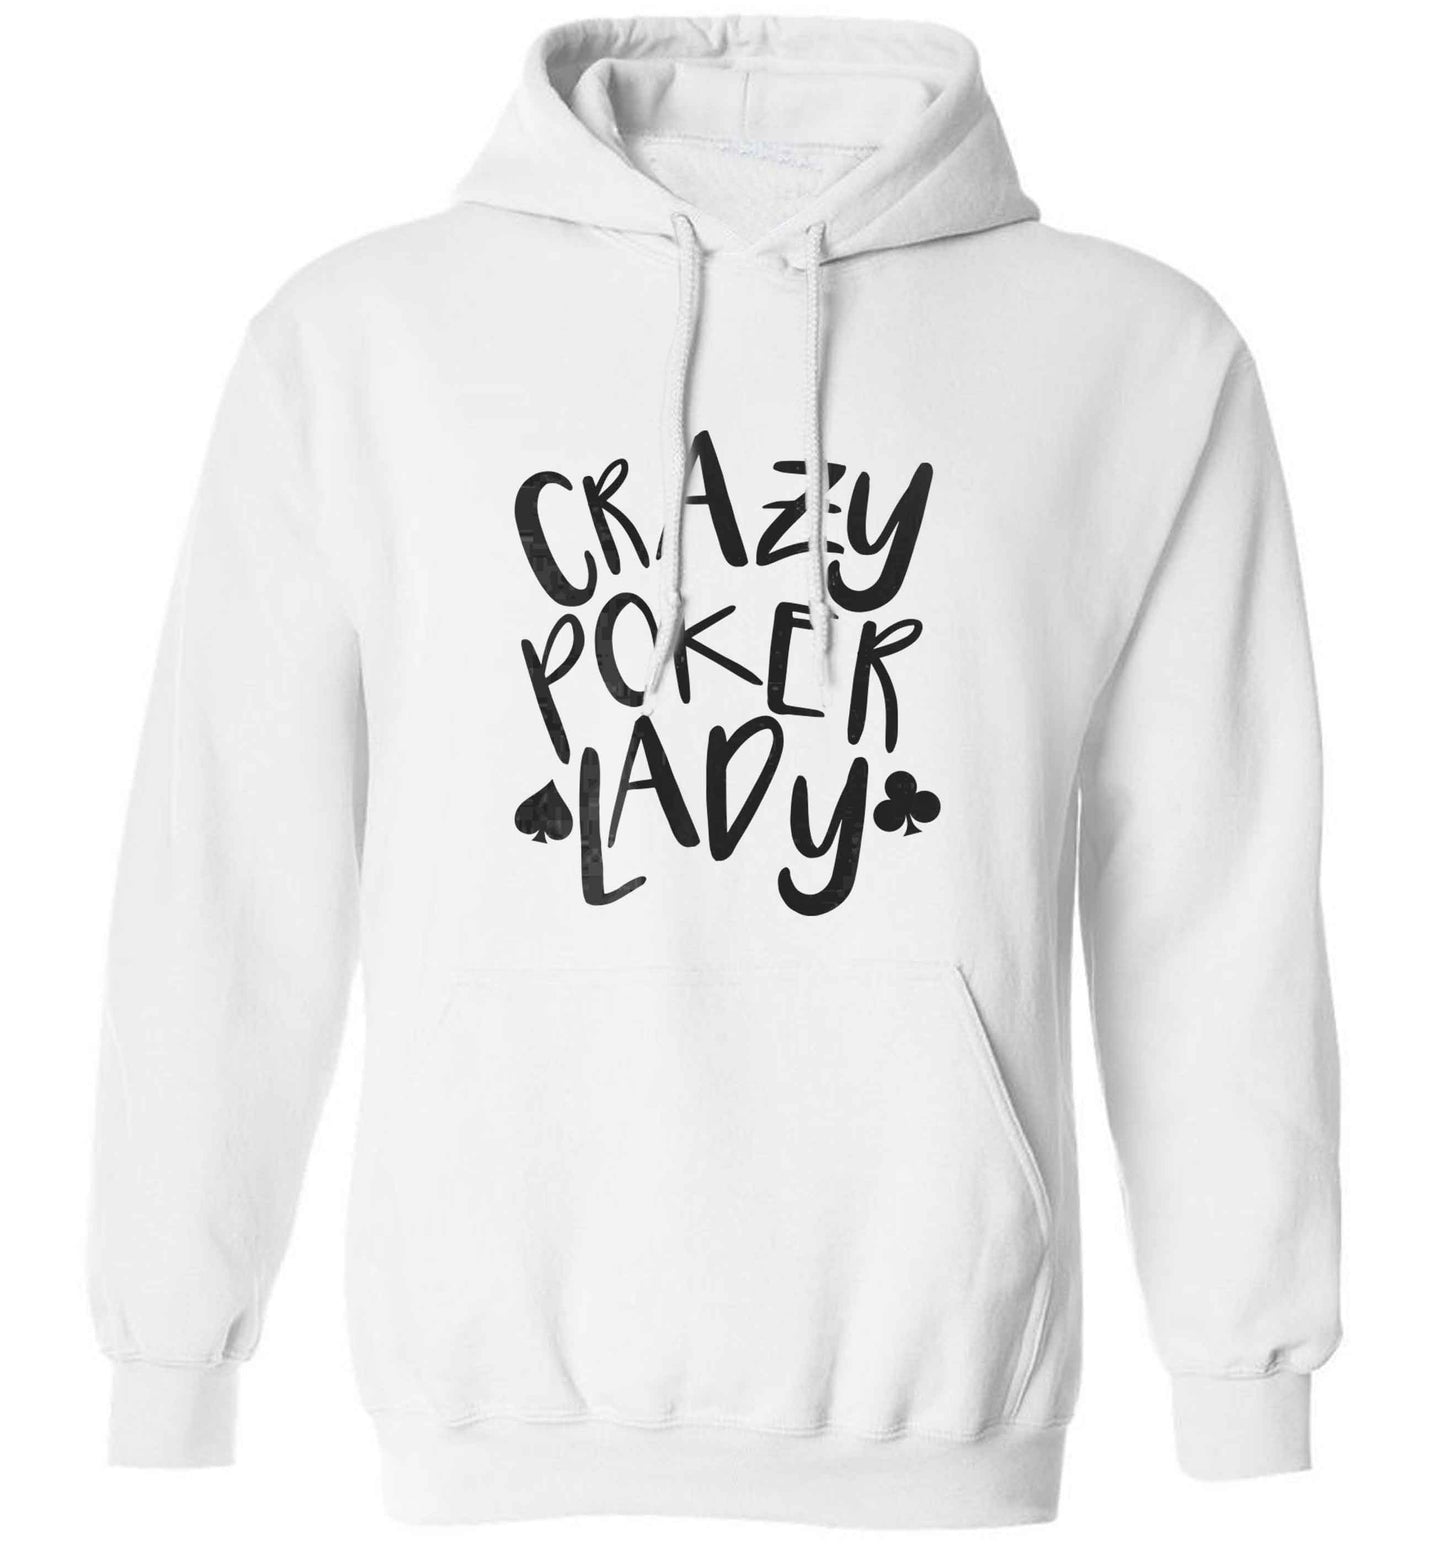 Crazy poker lady adults unisex white hoodie 2XL